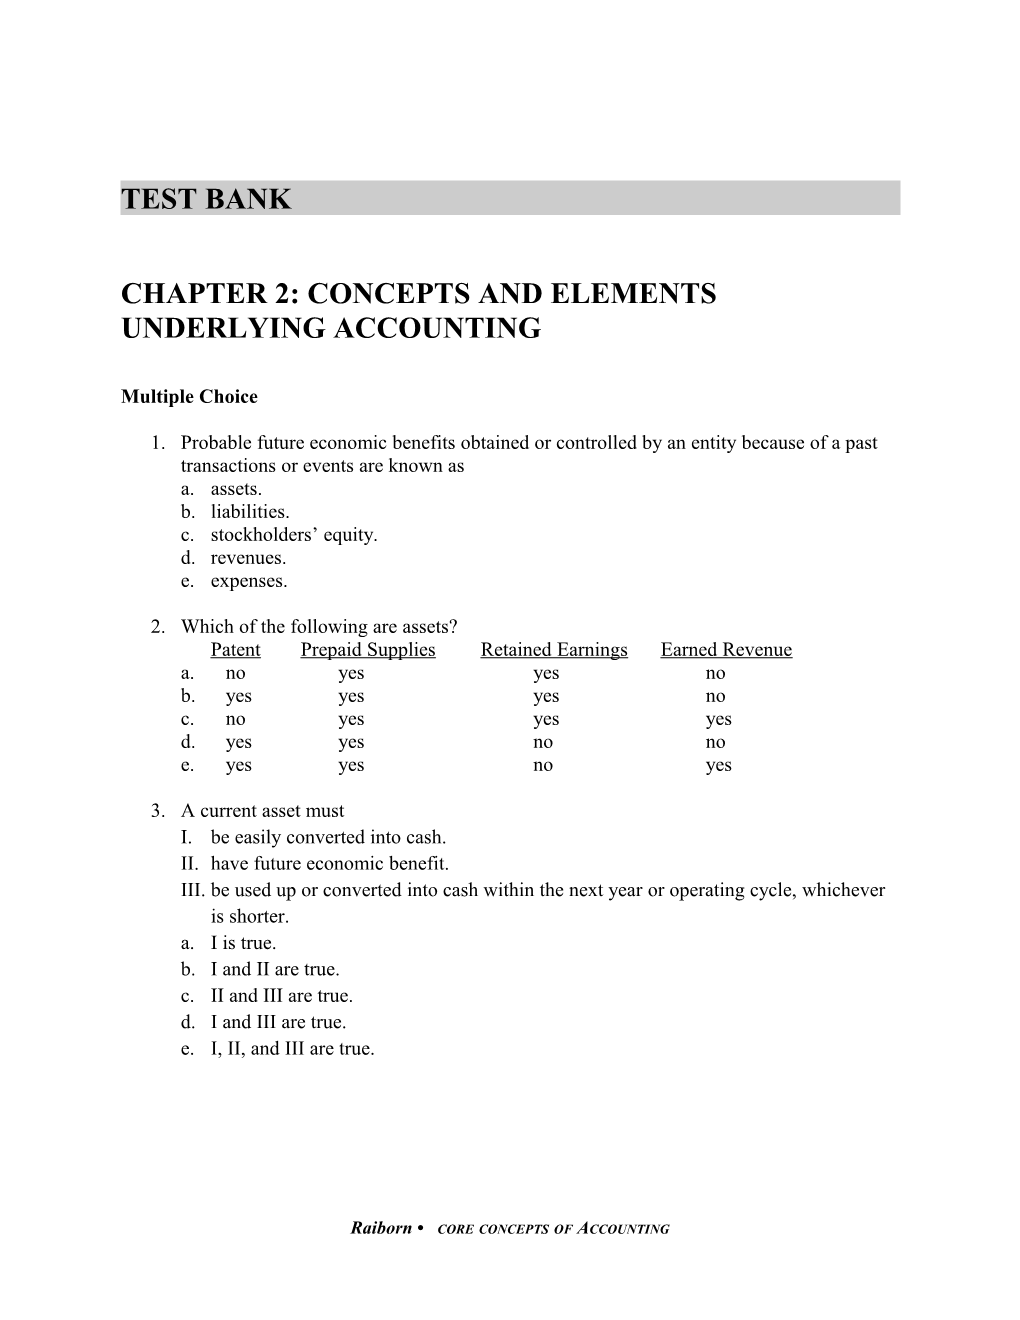 Chapter 2: Concepts and Elements Underlying Accounting